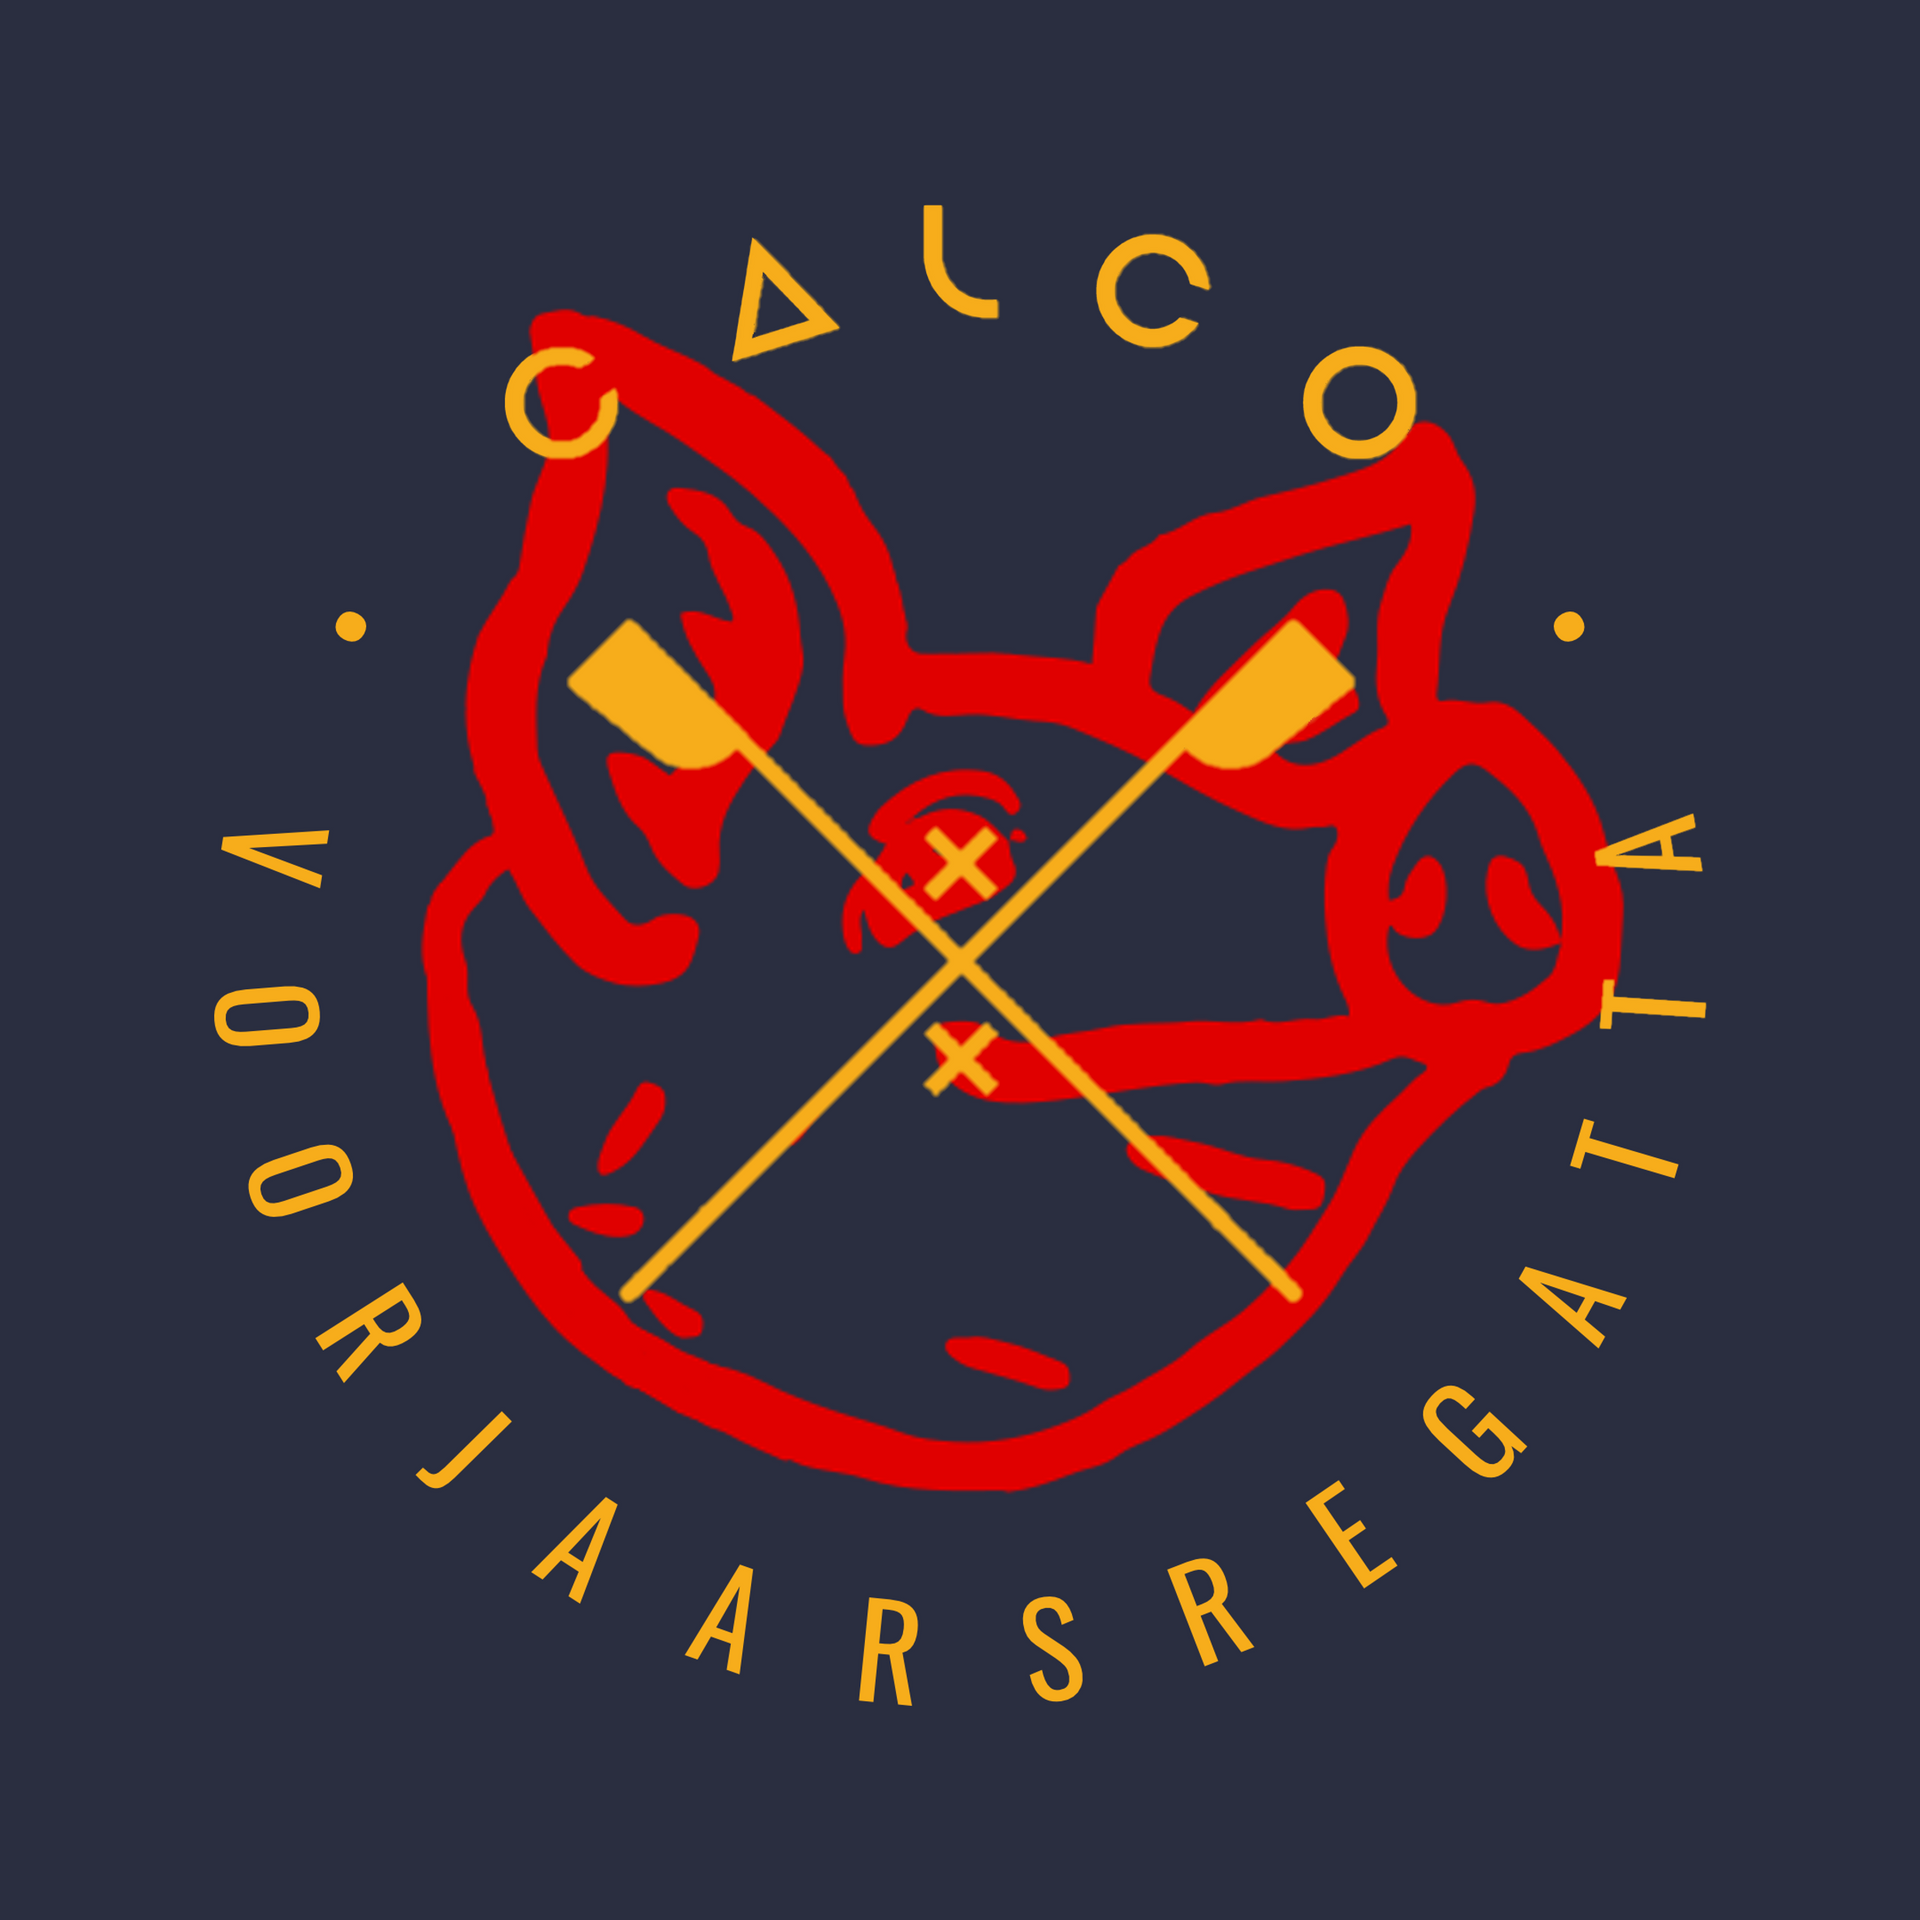 A logo for calco voorjaarsregatta with a pig holding two oars